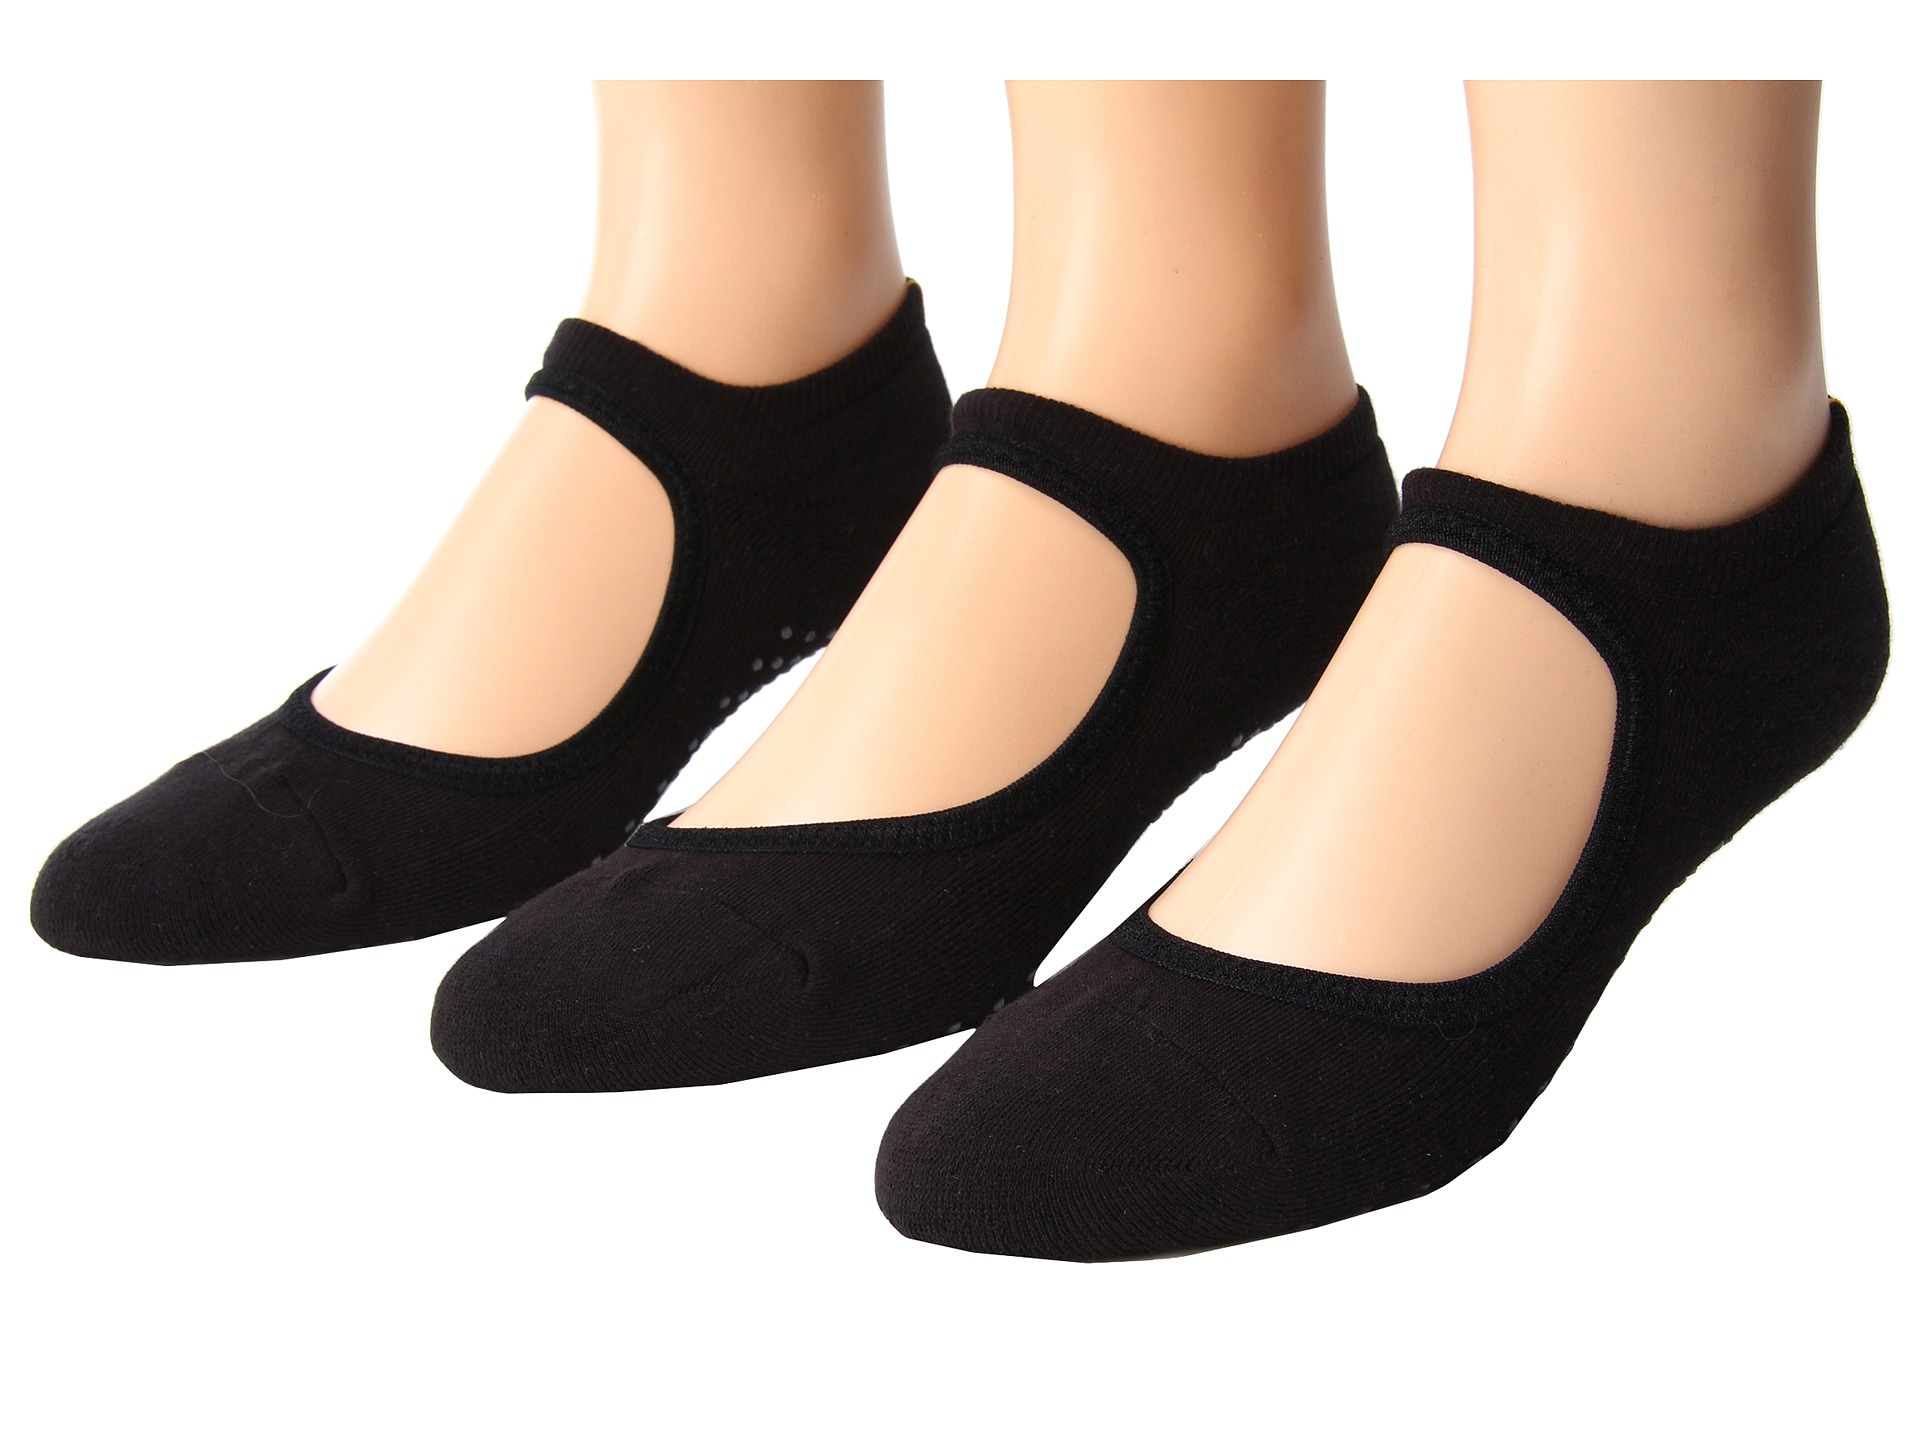 Lucy Ballet Grip Sock 3 Pair Pack Lucy Black | Shipped Free at Zappos